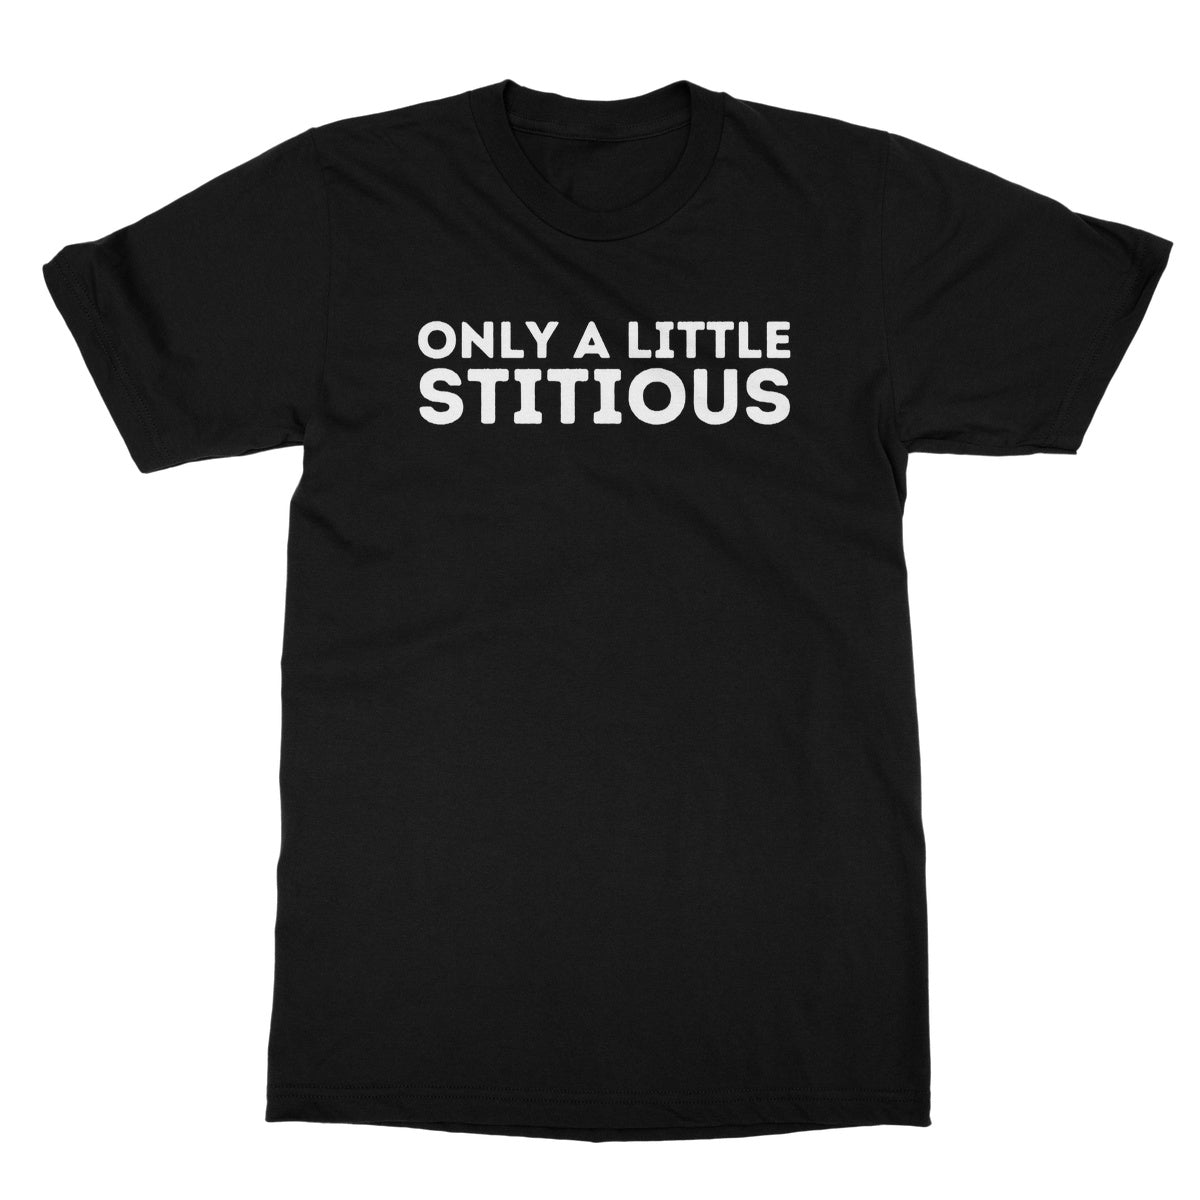 only a little stitious t shirt black